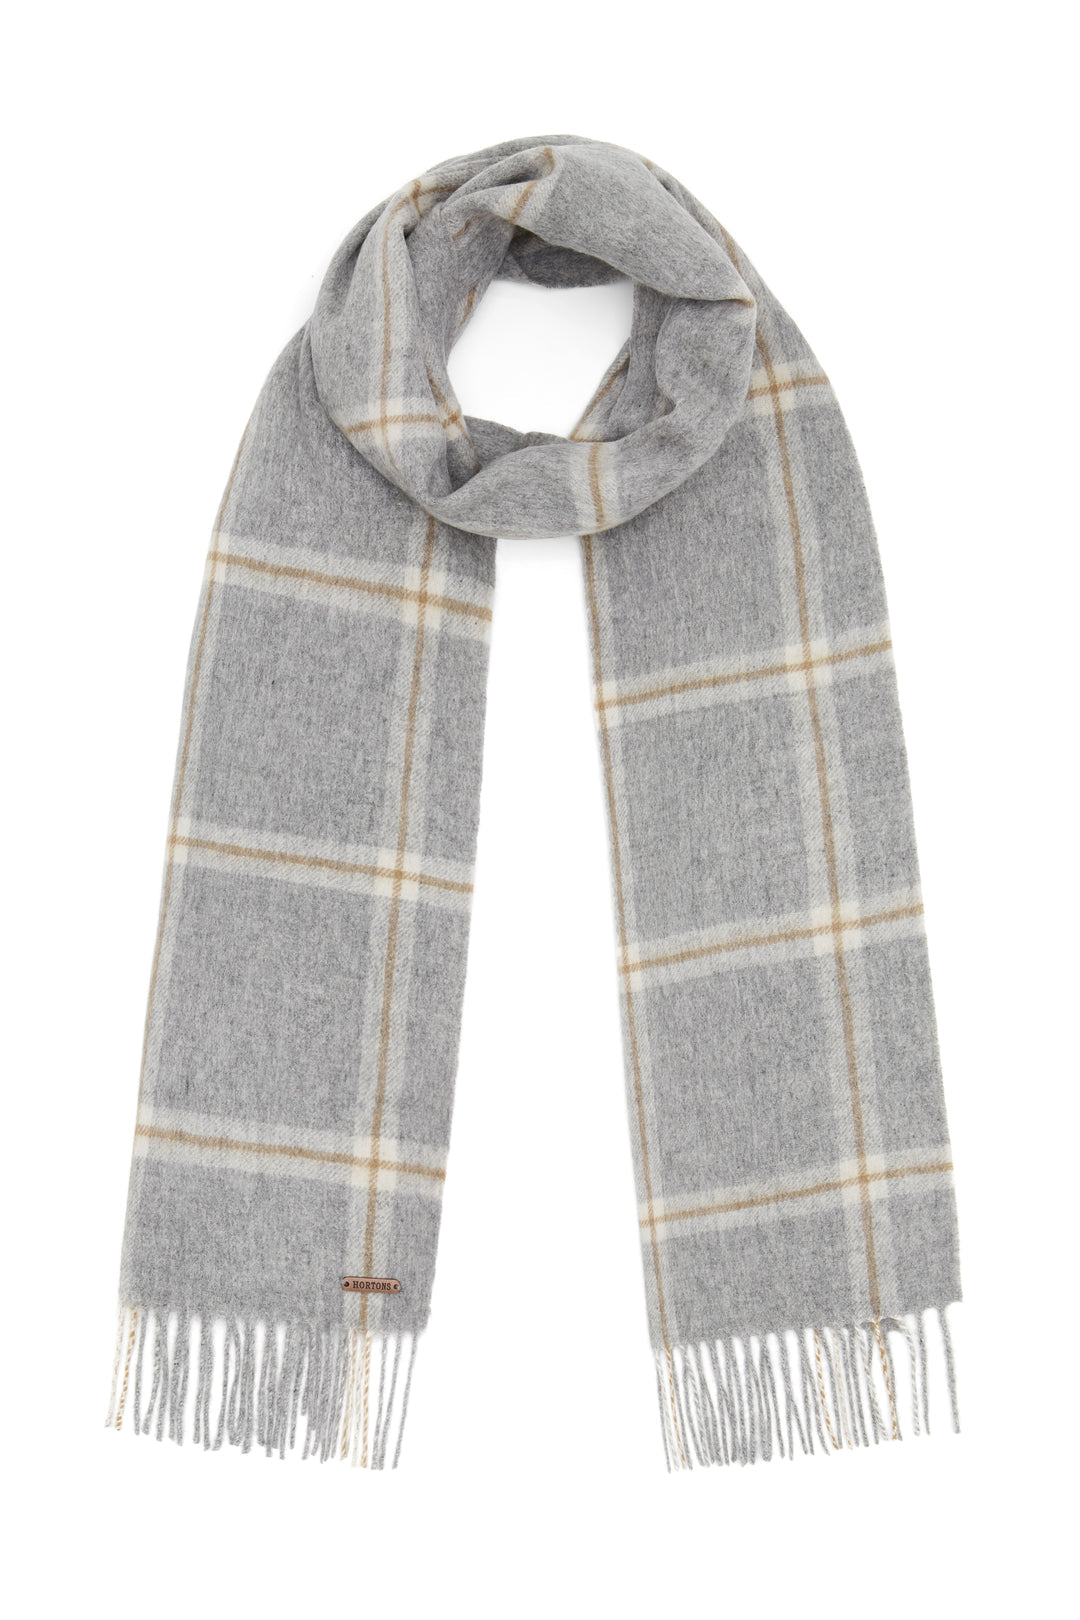 The Hexham Lambswool Scarf - Grey Check